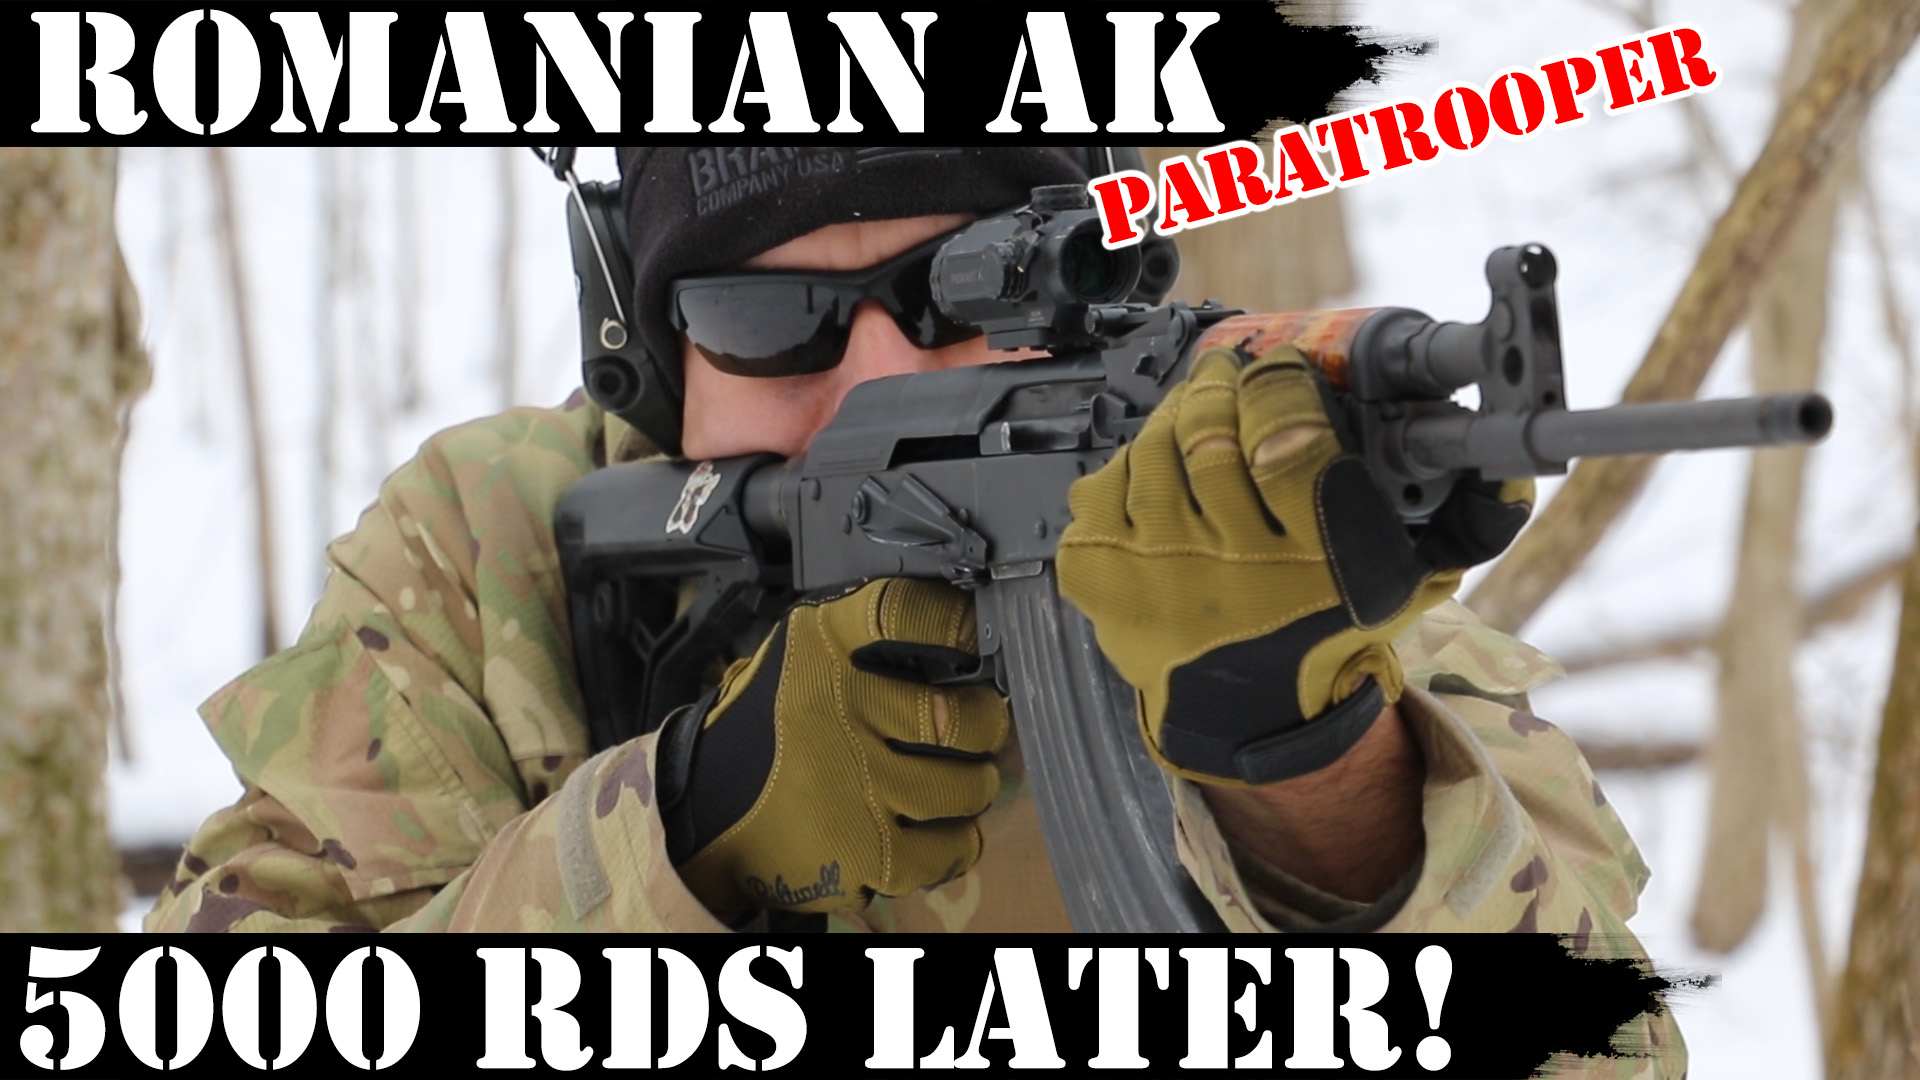 Romanian Paratrooper AK: 5,000 Rds Later!